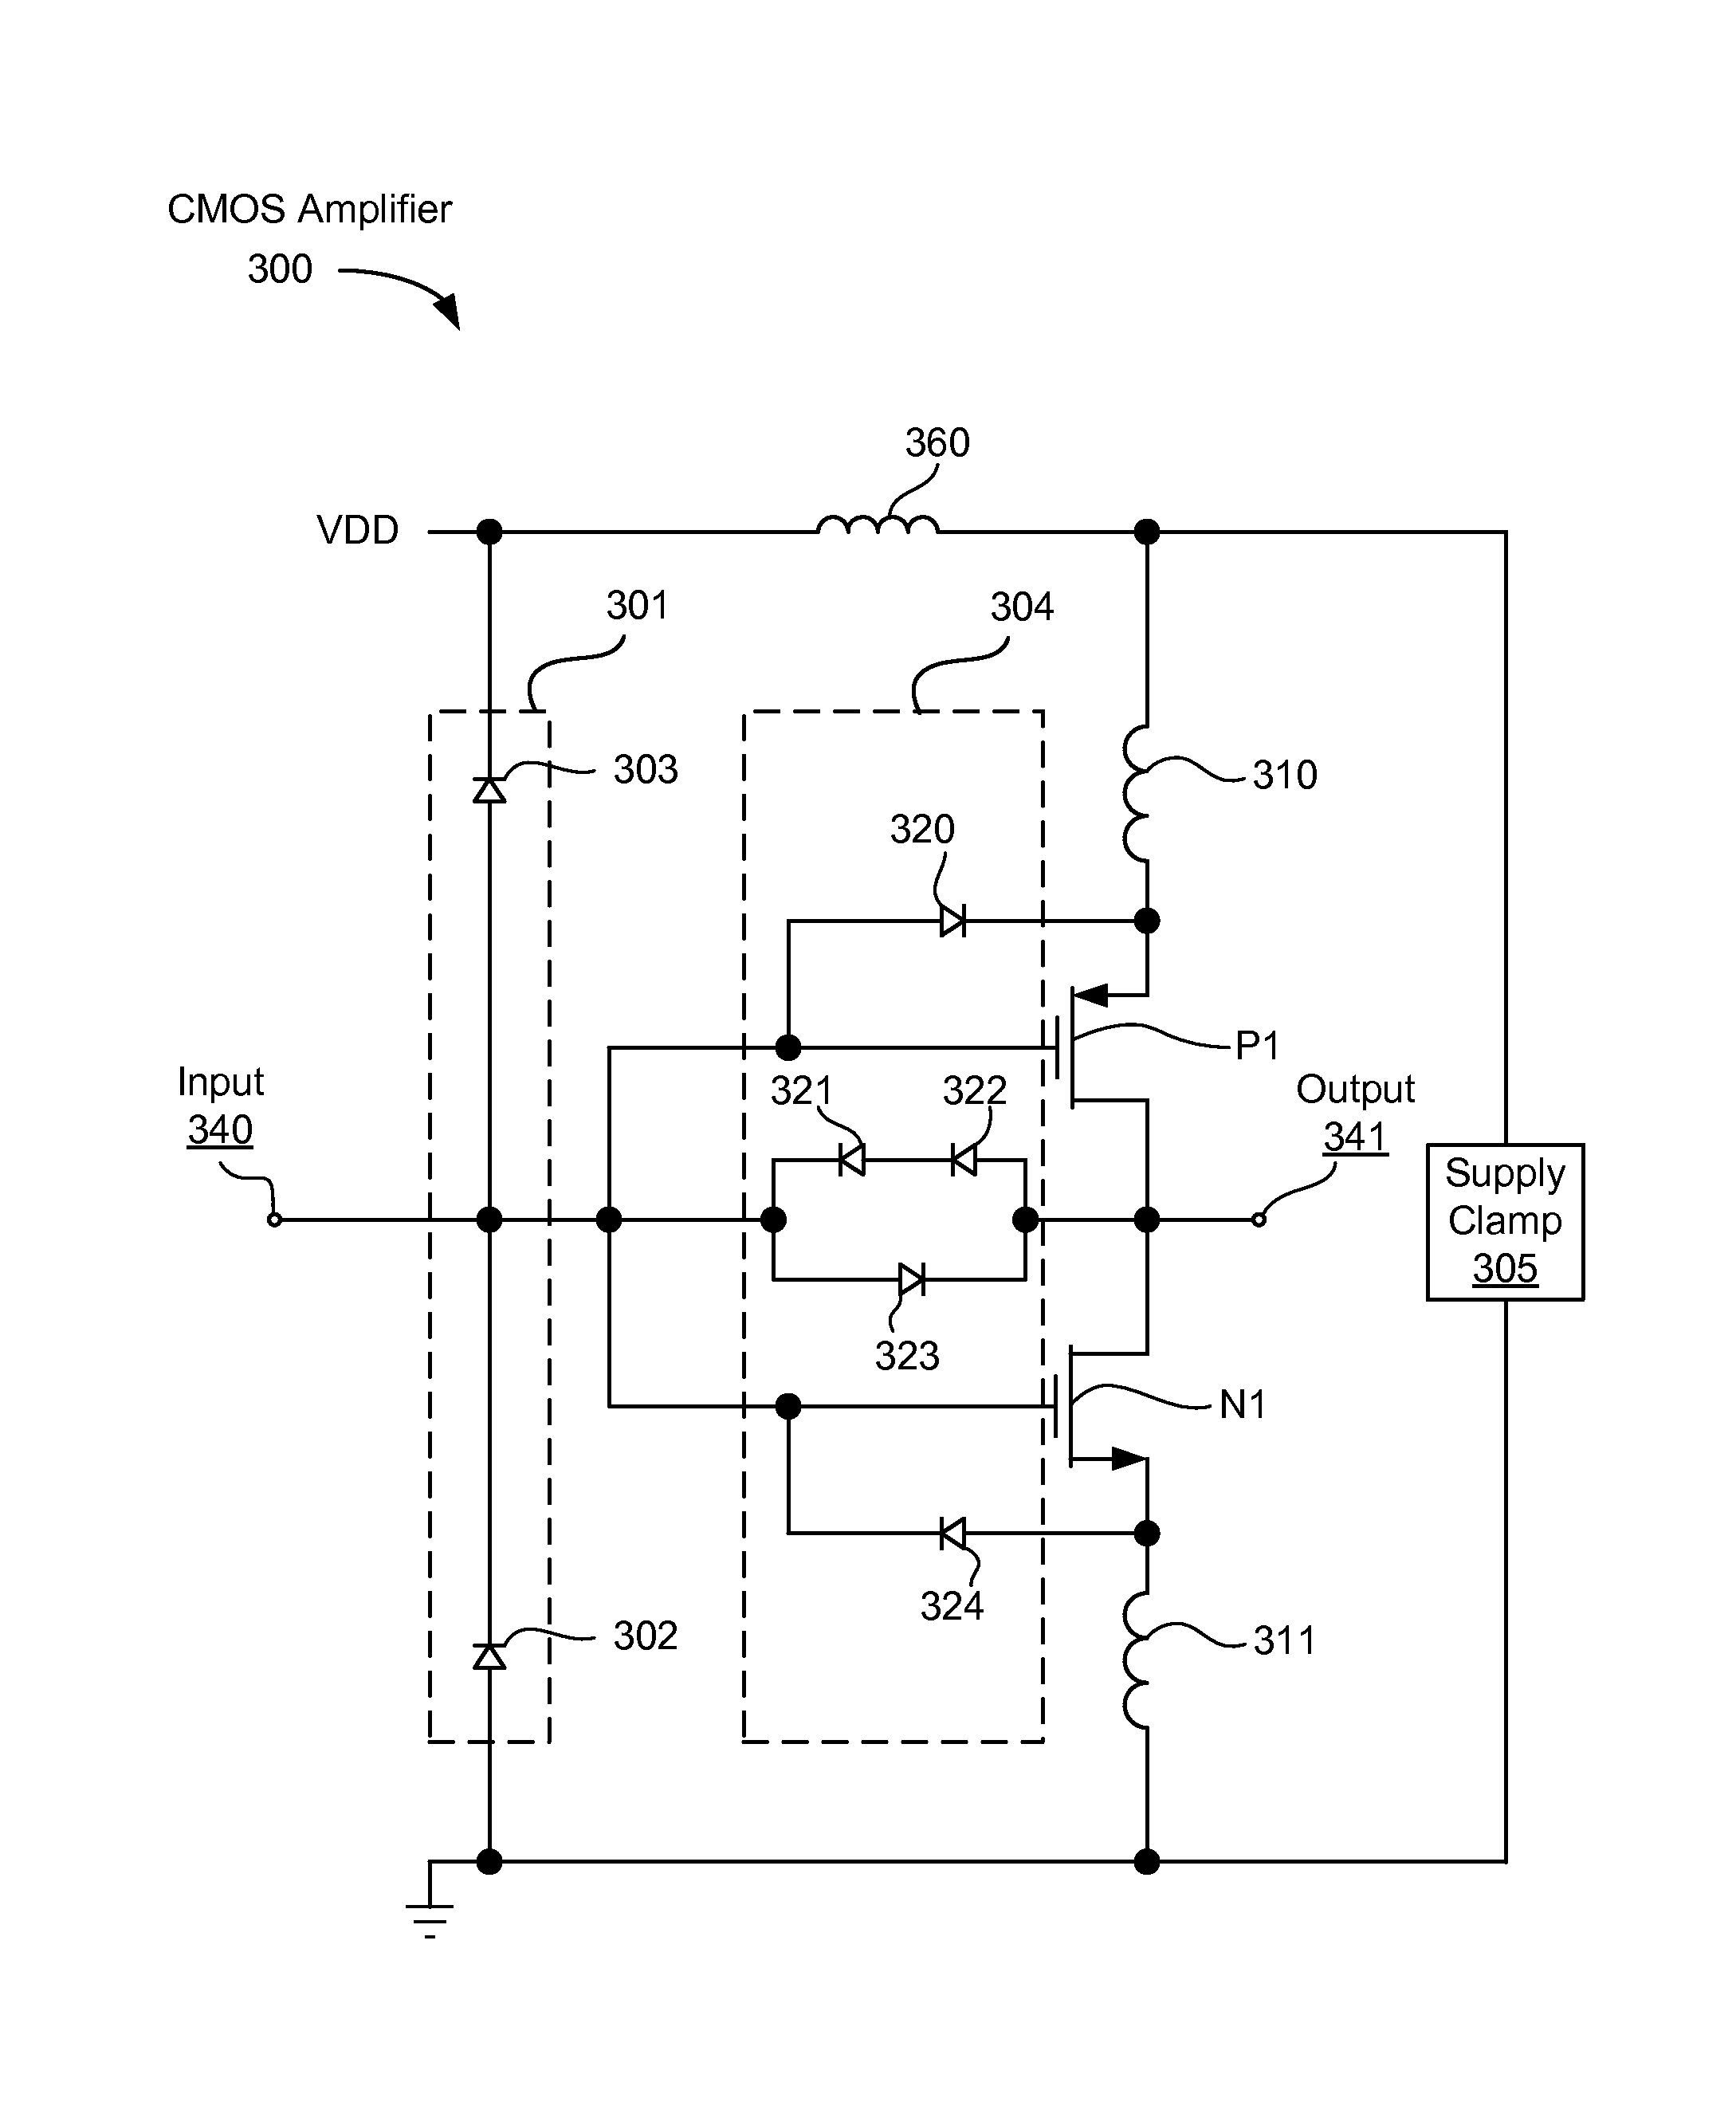 Electrostatic discharge protection for CMOS amplifier